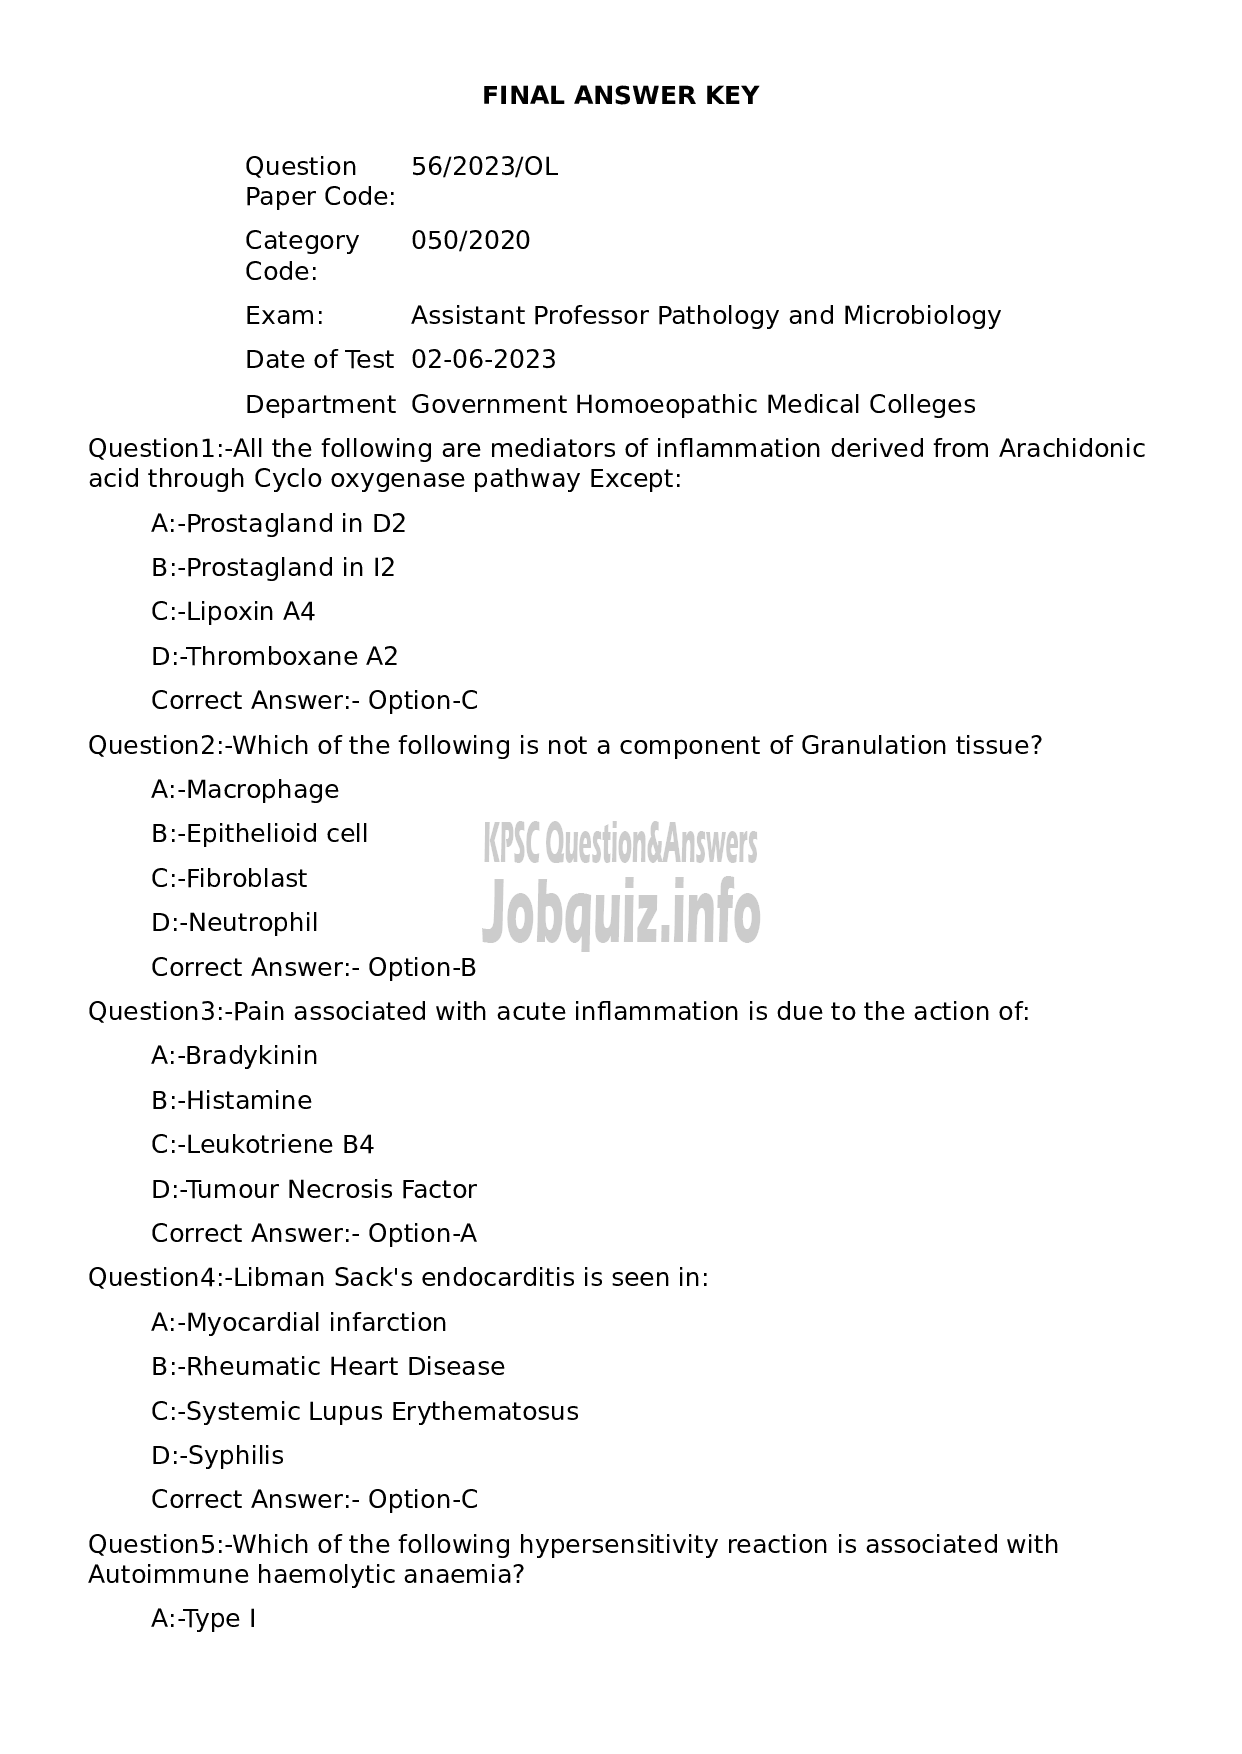 Kerala PSC Question Paper - Assistant Professor Pathology and Microbiology-1